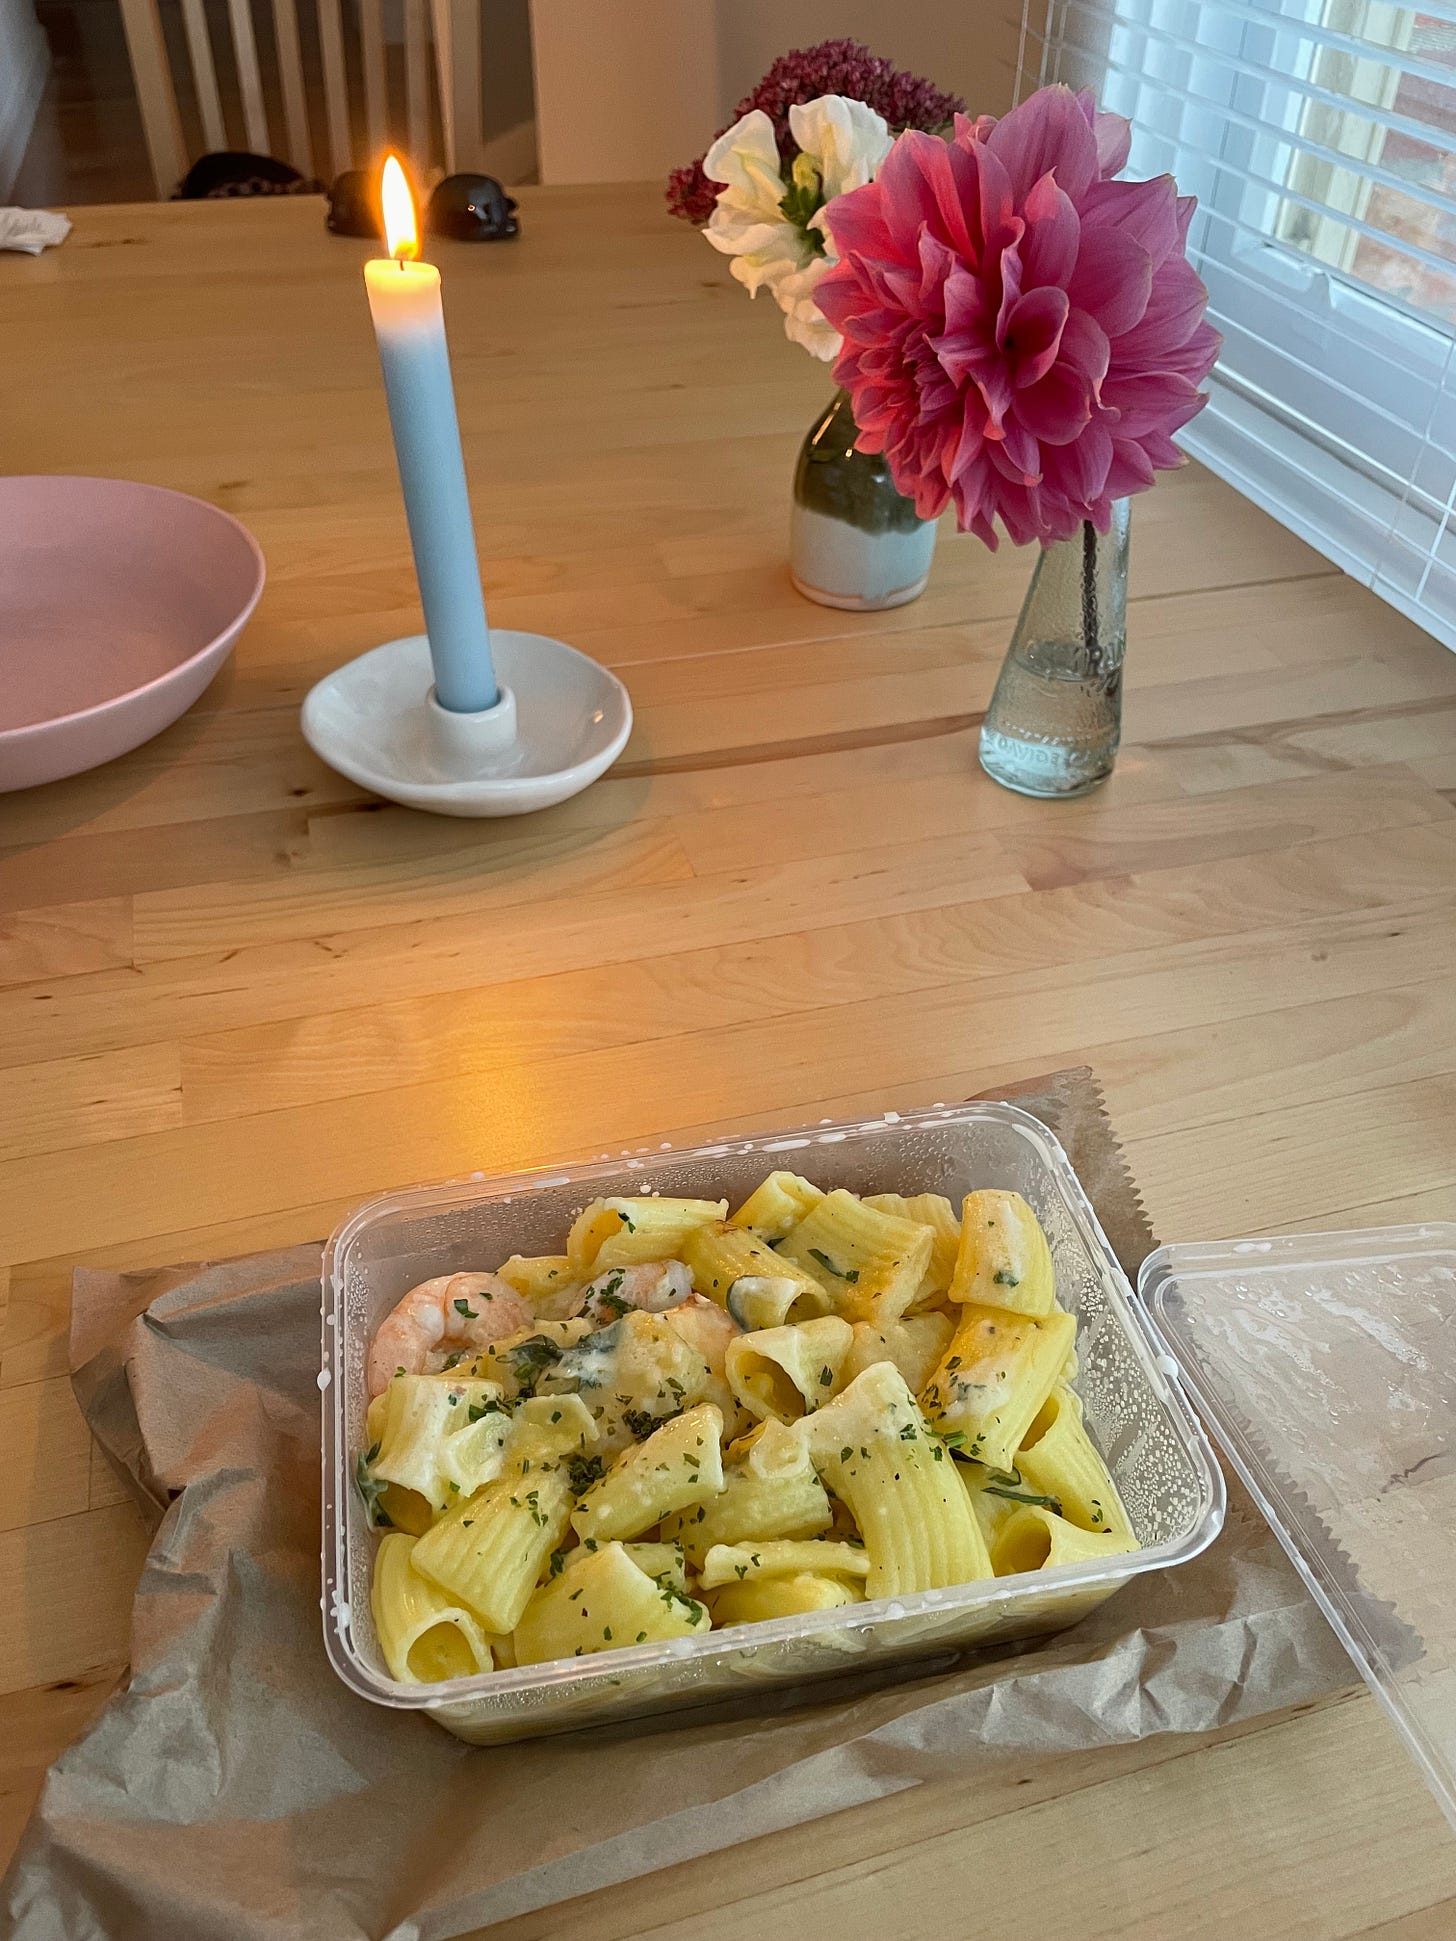 Candle at dinner time with dahlias and a takeaway container of pasta.